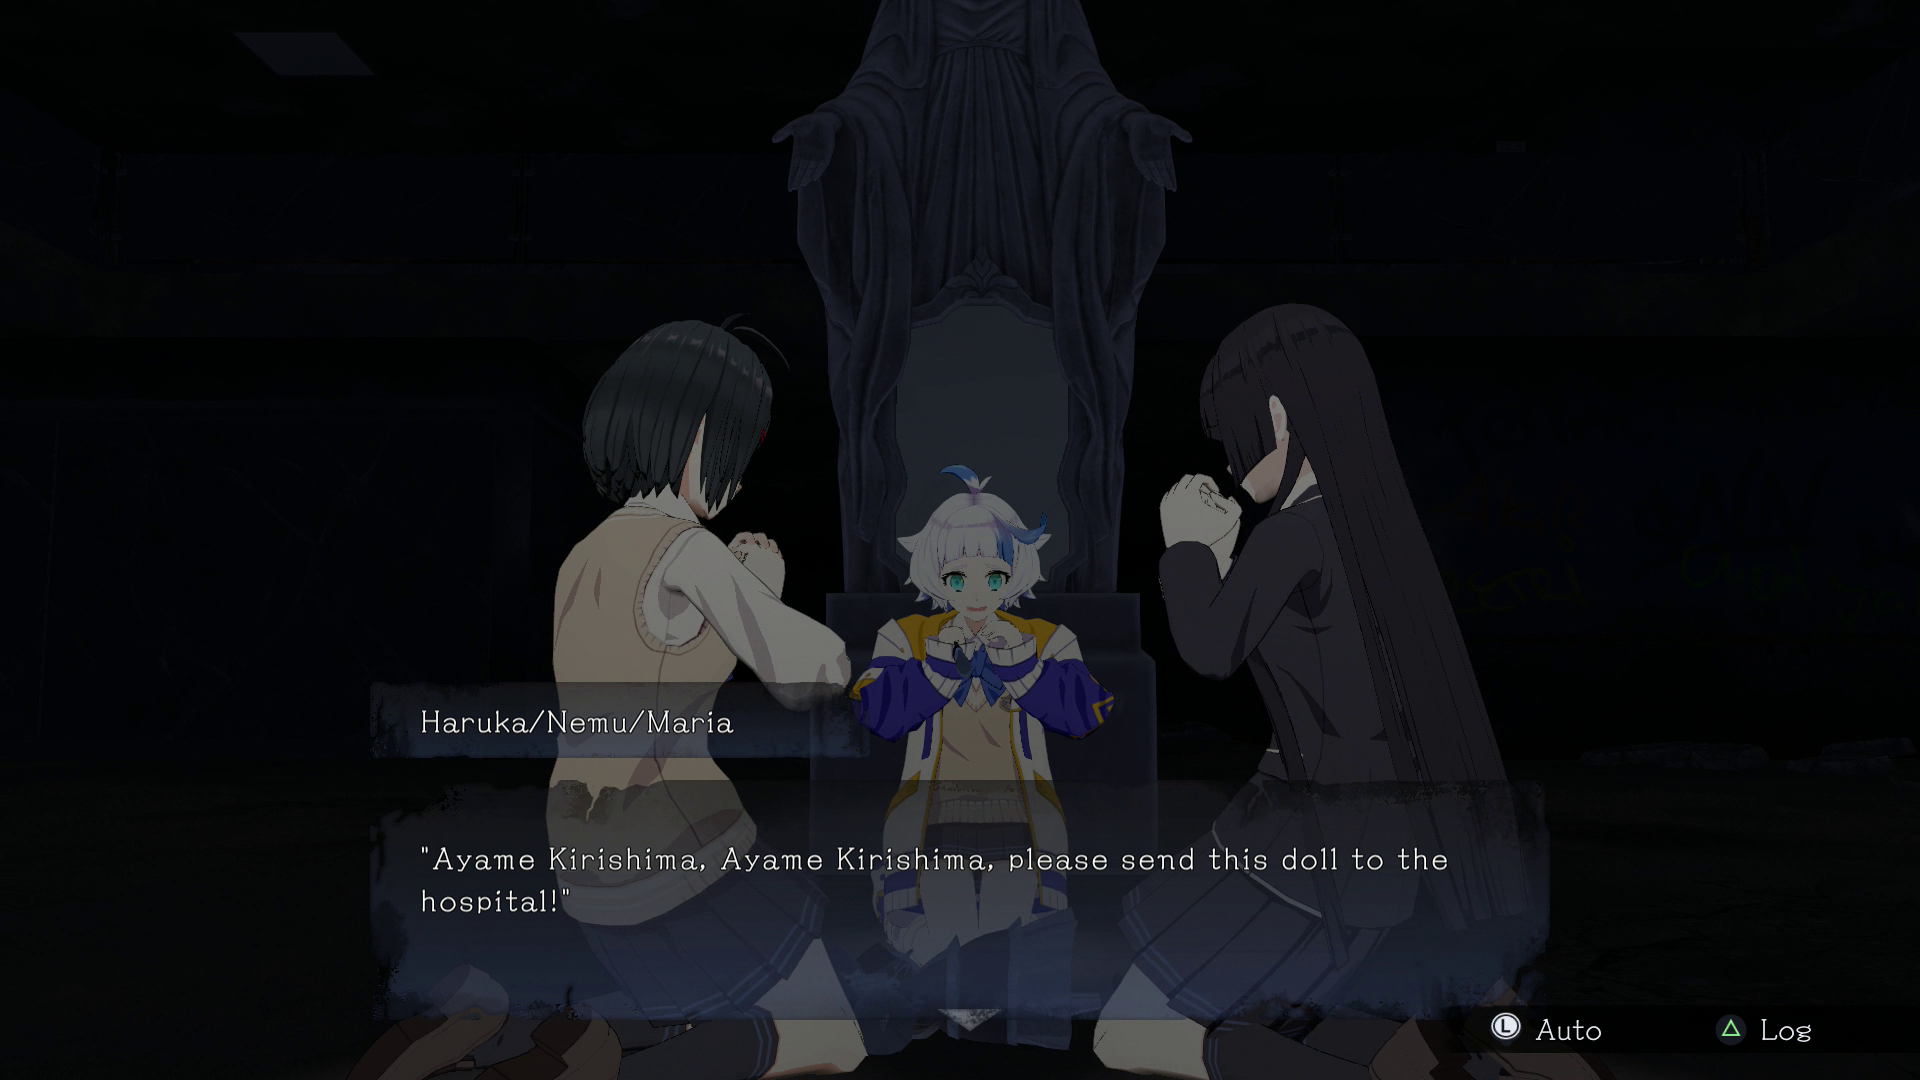 NSW Corpse Party 2: Darkness Distortion